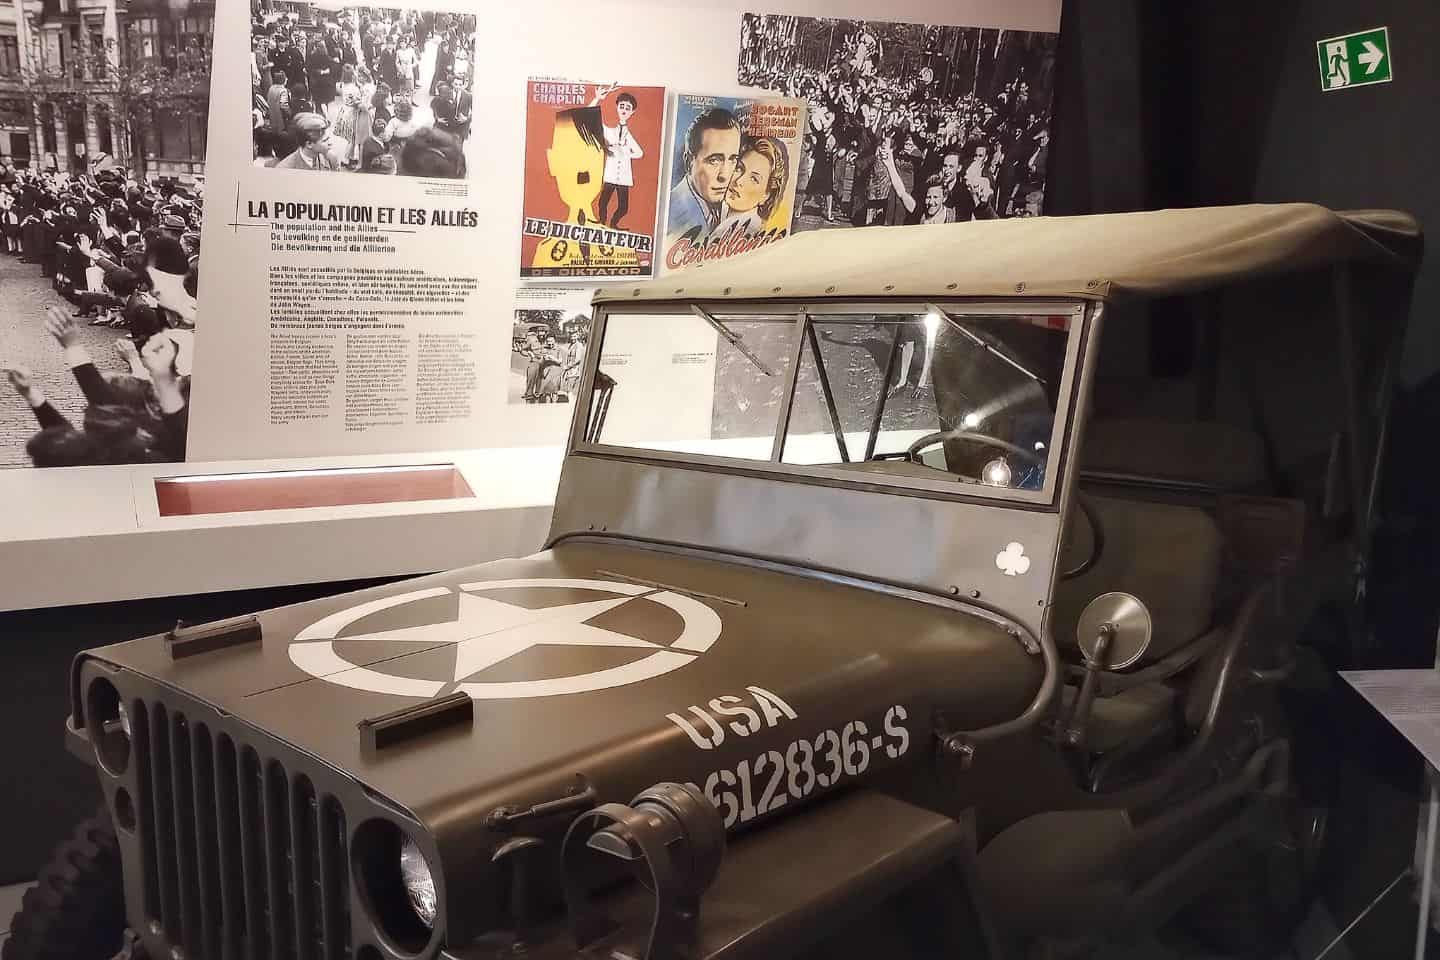 An old military jeep in front of a museum display